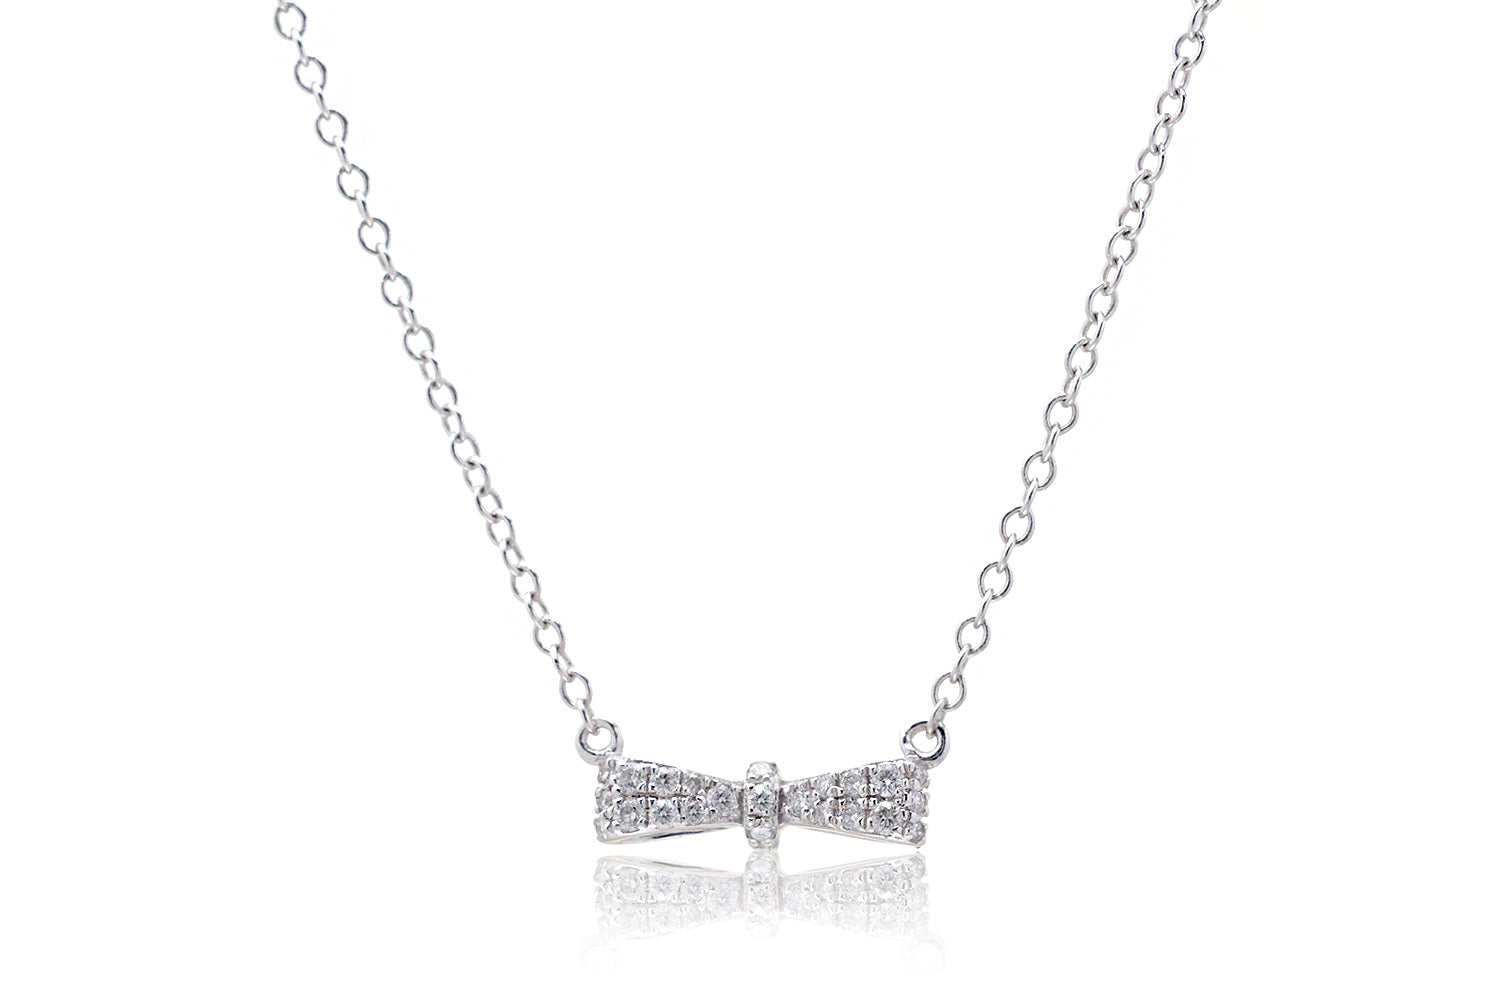 The Small Bow Diamond Necklace